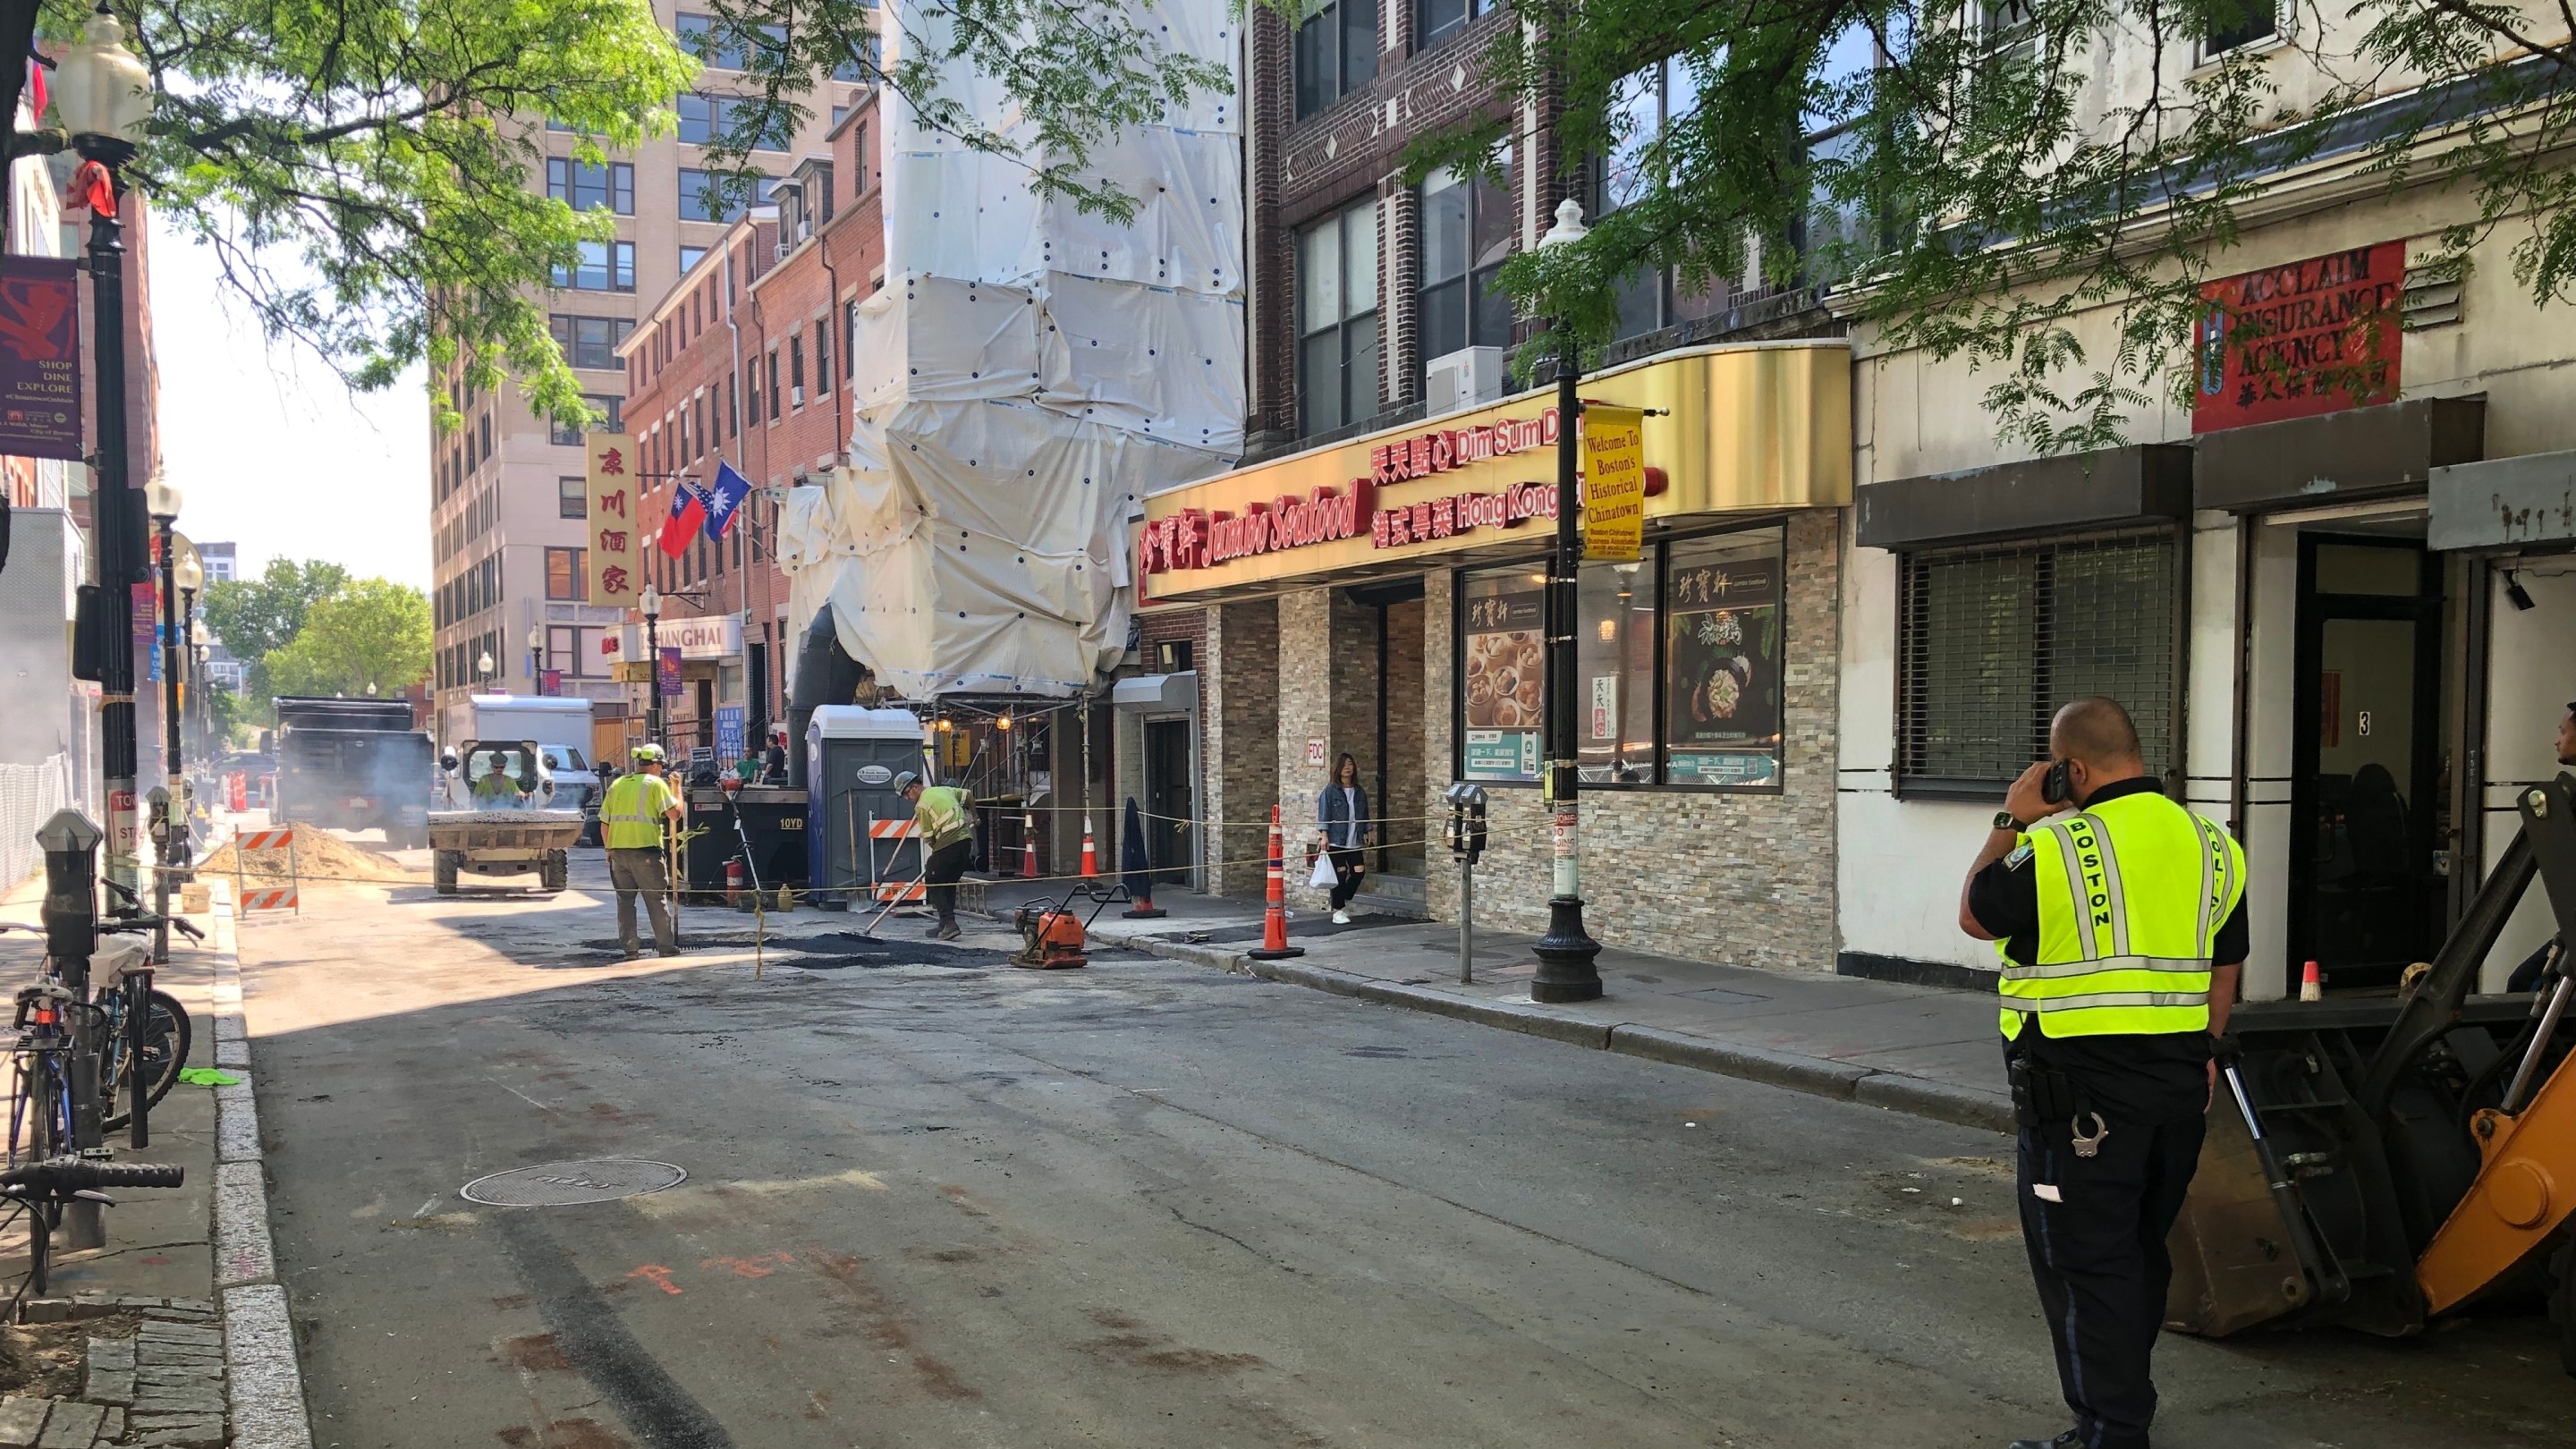 A photo of a street in Chinatown. In the distance on the left, several construction workers shovel asphalt to patch a hole in the street, which is roped off around the construction site. On the right, a Boston Police officer in a green high-viz vest talks on his phone while watching the work.